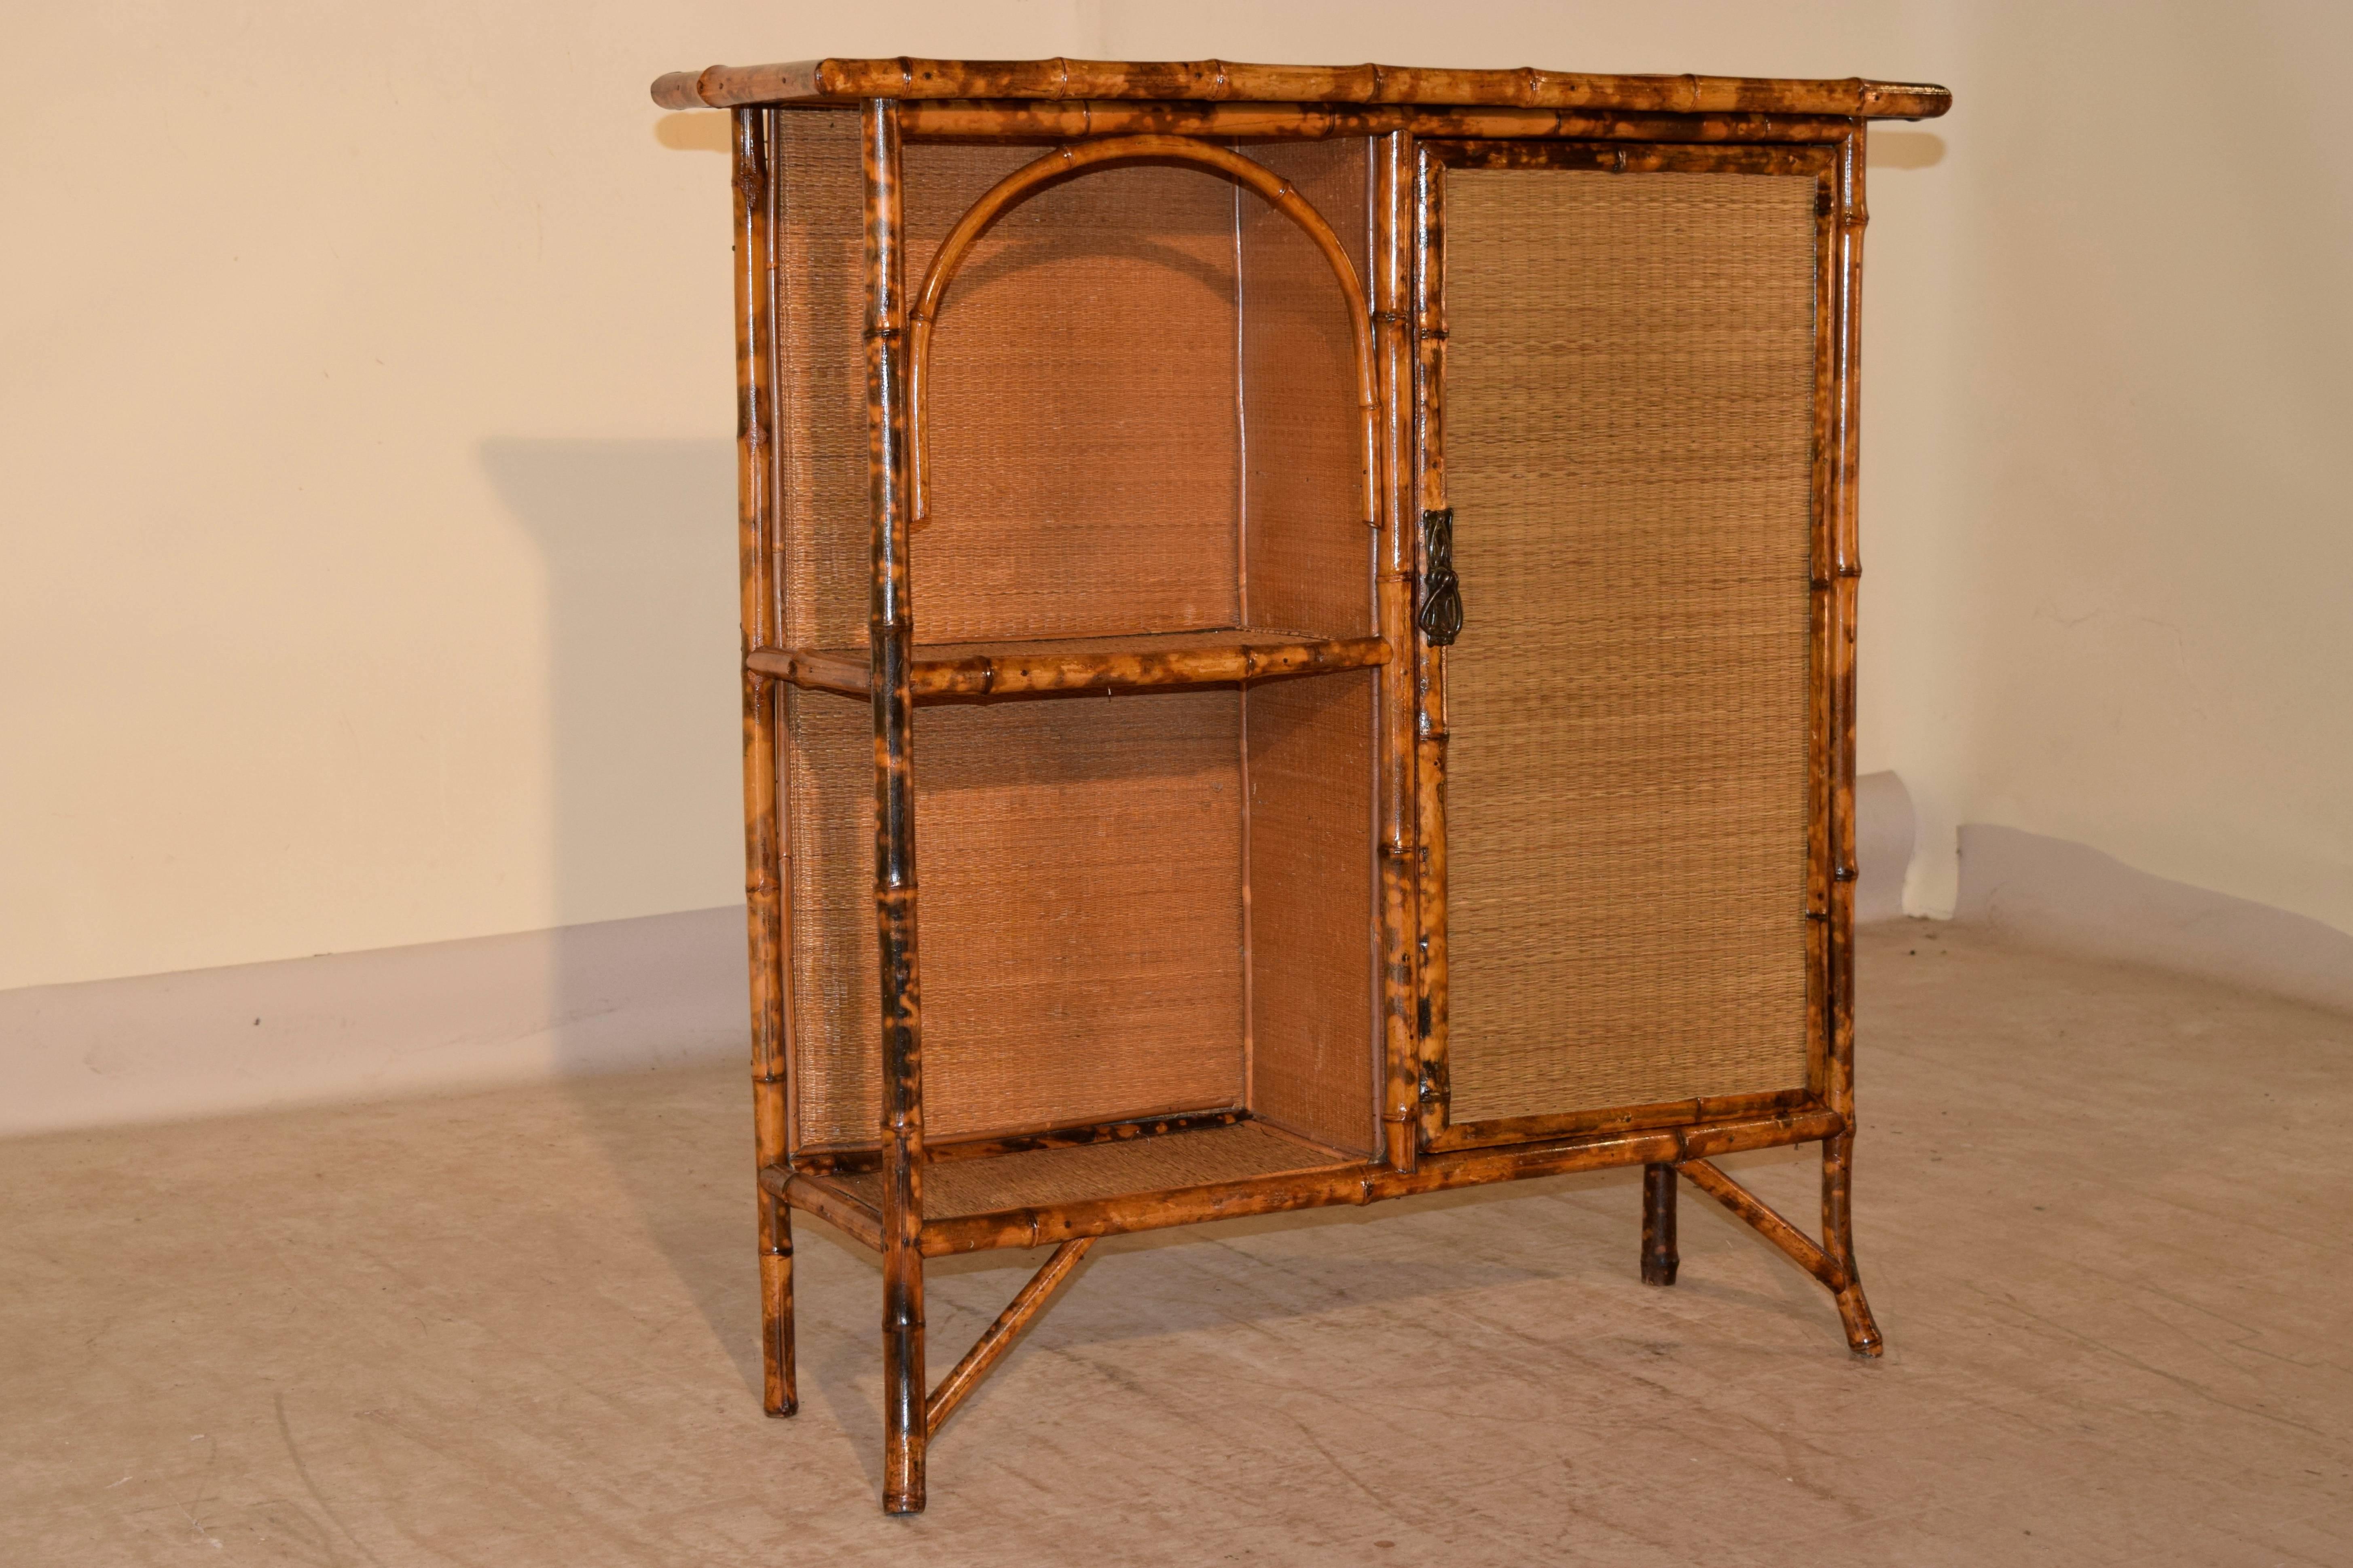 19th century French bookcase made from tortoise bamboo and pine. The top, shelves, and door are covered in rush, and the backing for the bookcase is burlap. There are two open shelves on the left side, and in the cabinet are three more pine shelves